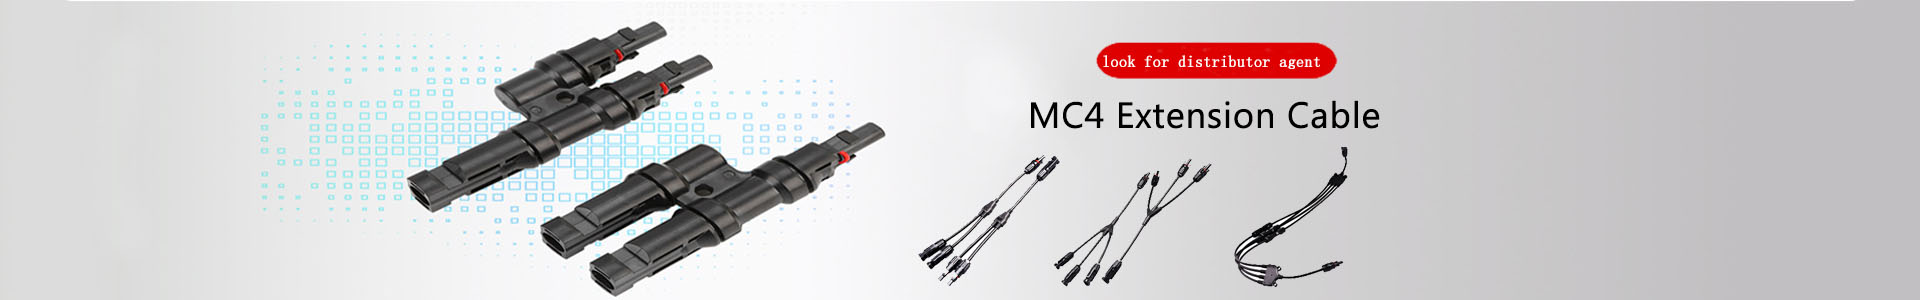 MC4 T Branch connector-Solar Branch Connector-Solar | solar connector,solar branch connector,diode fuse connector,MC4 extnsion cable,H1Z2Z2 solar cable, UL4703 solar cable | Leading manufacturer and supplier of solar pv cables and connectors